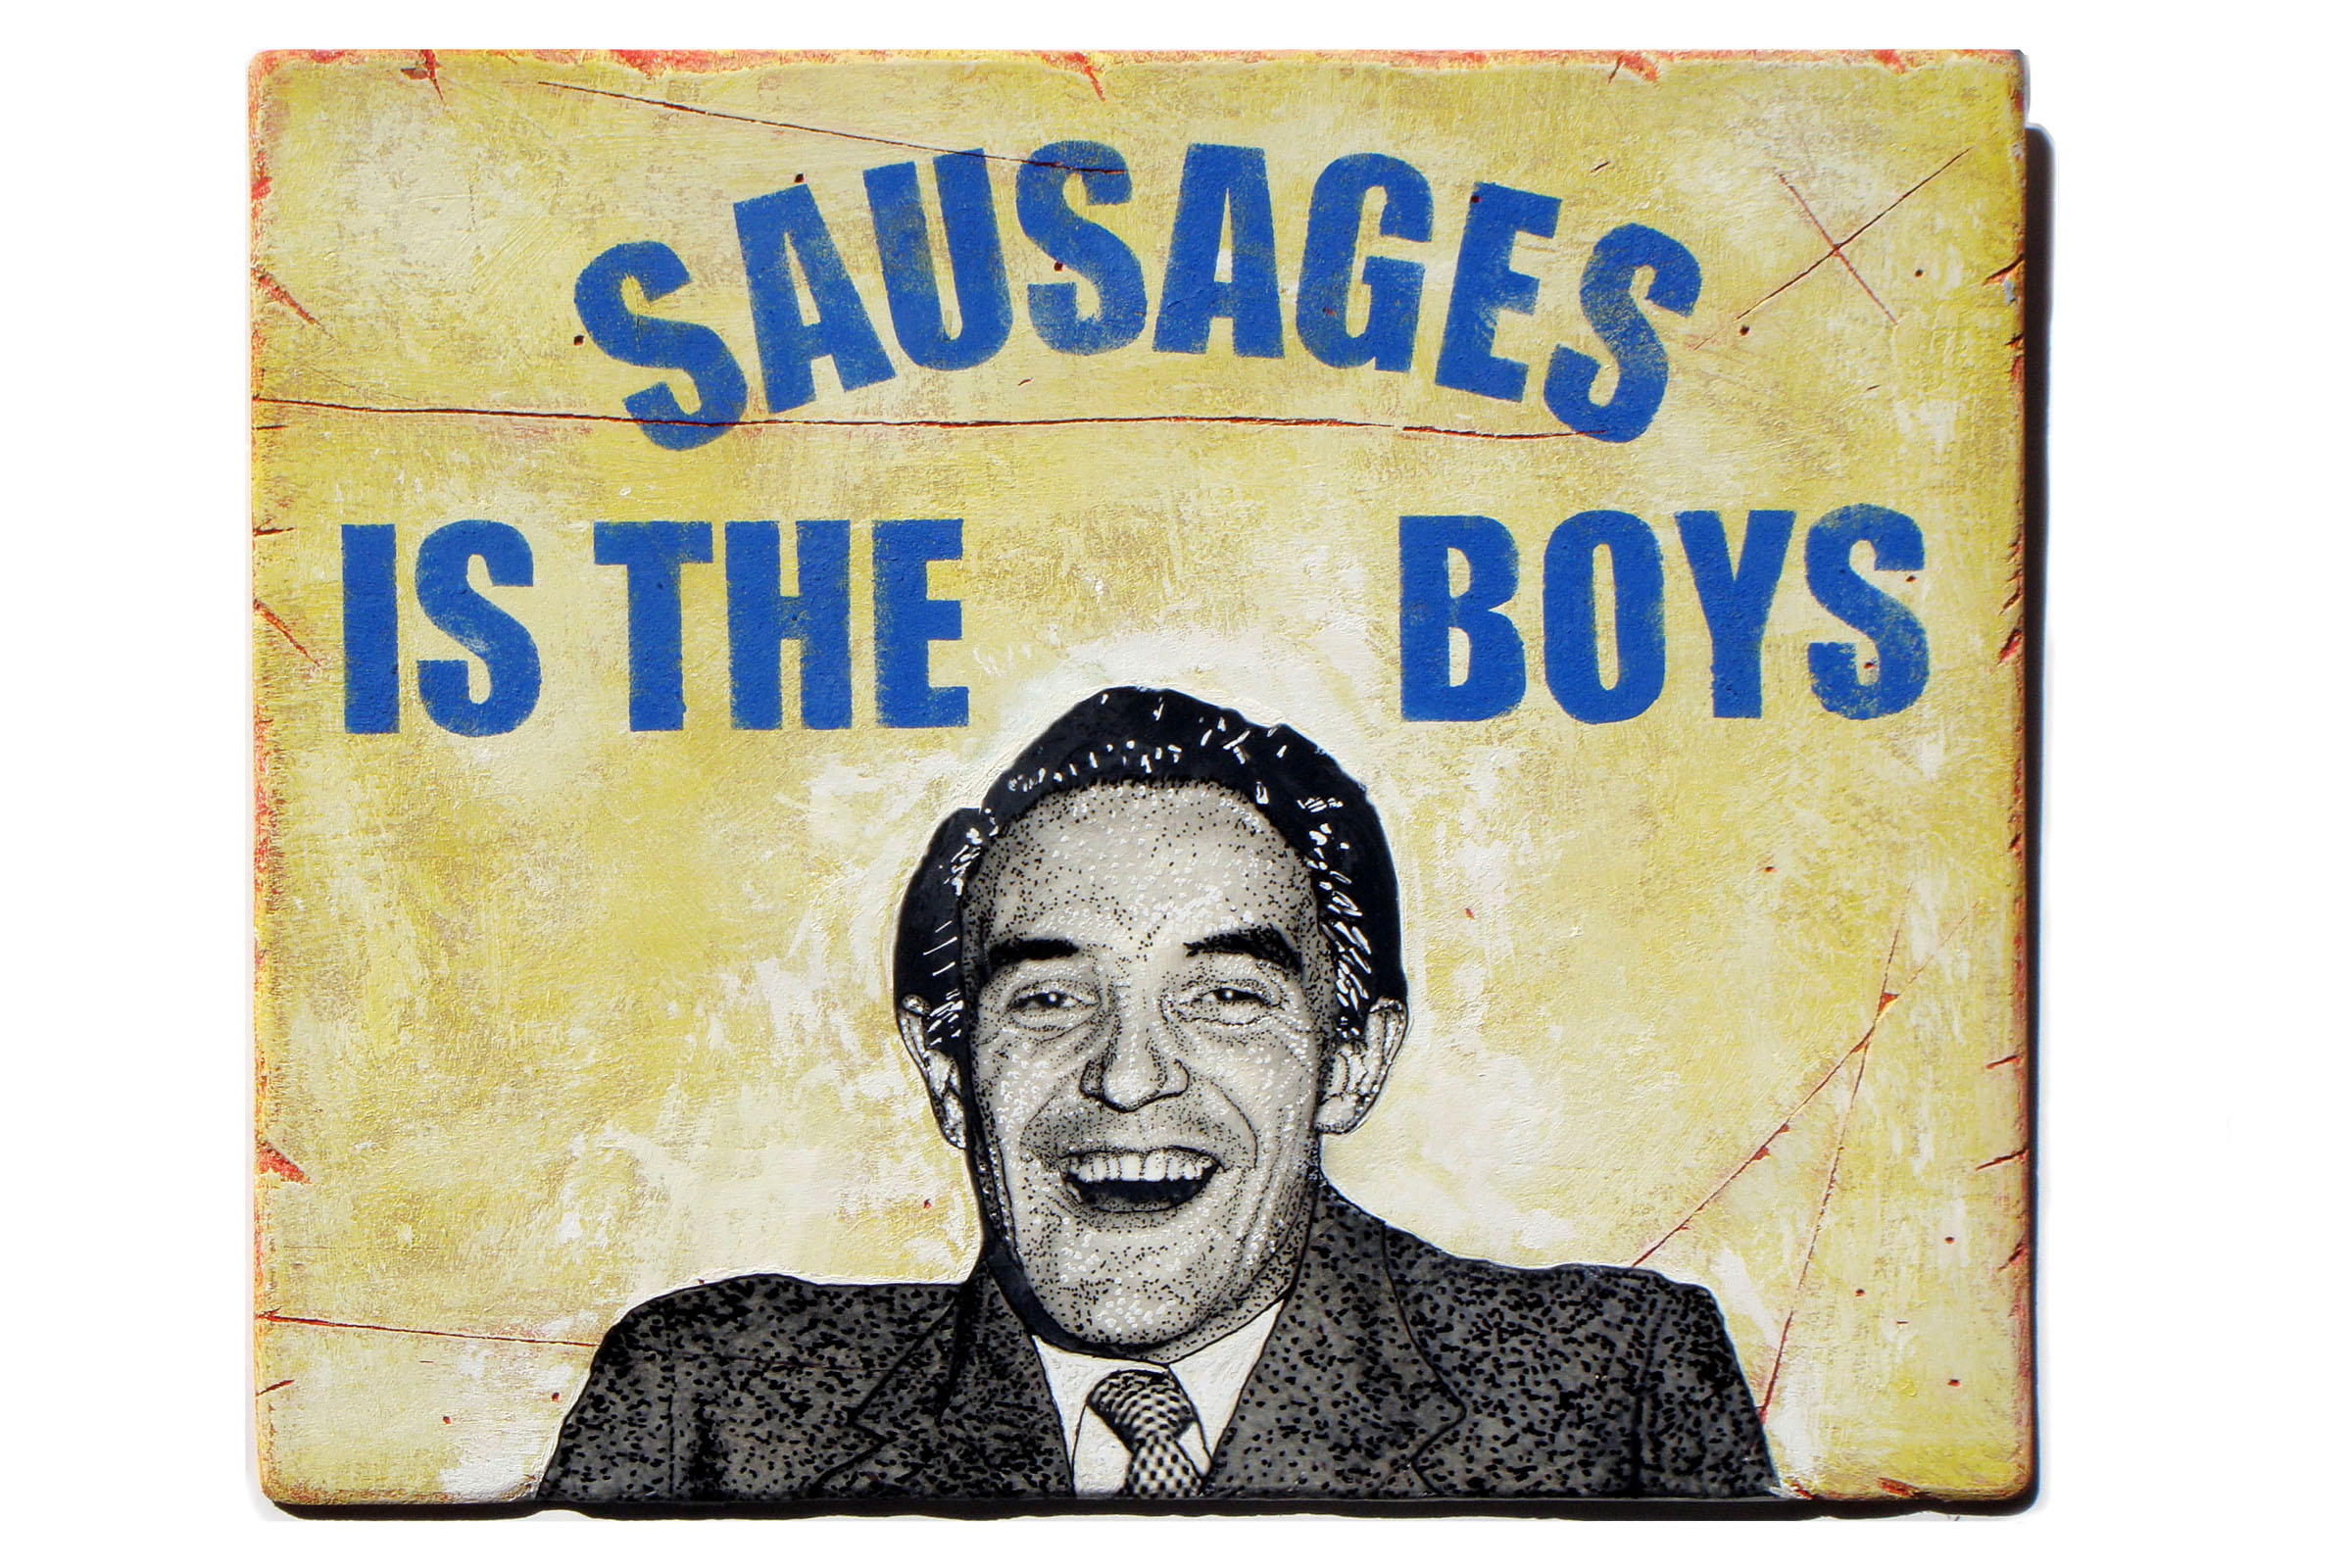 SAUSAGES IS THE BOYS<br>Mixed media on plywood<br>38 x 31cm